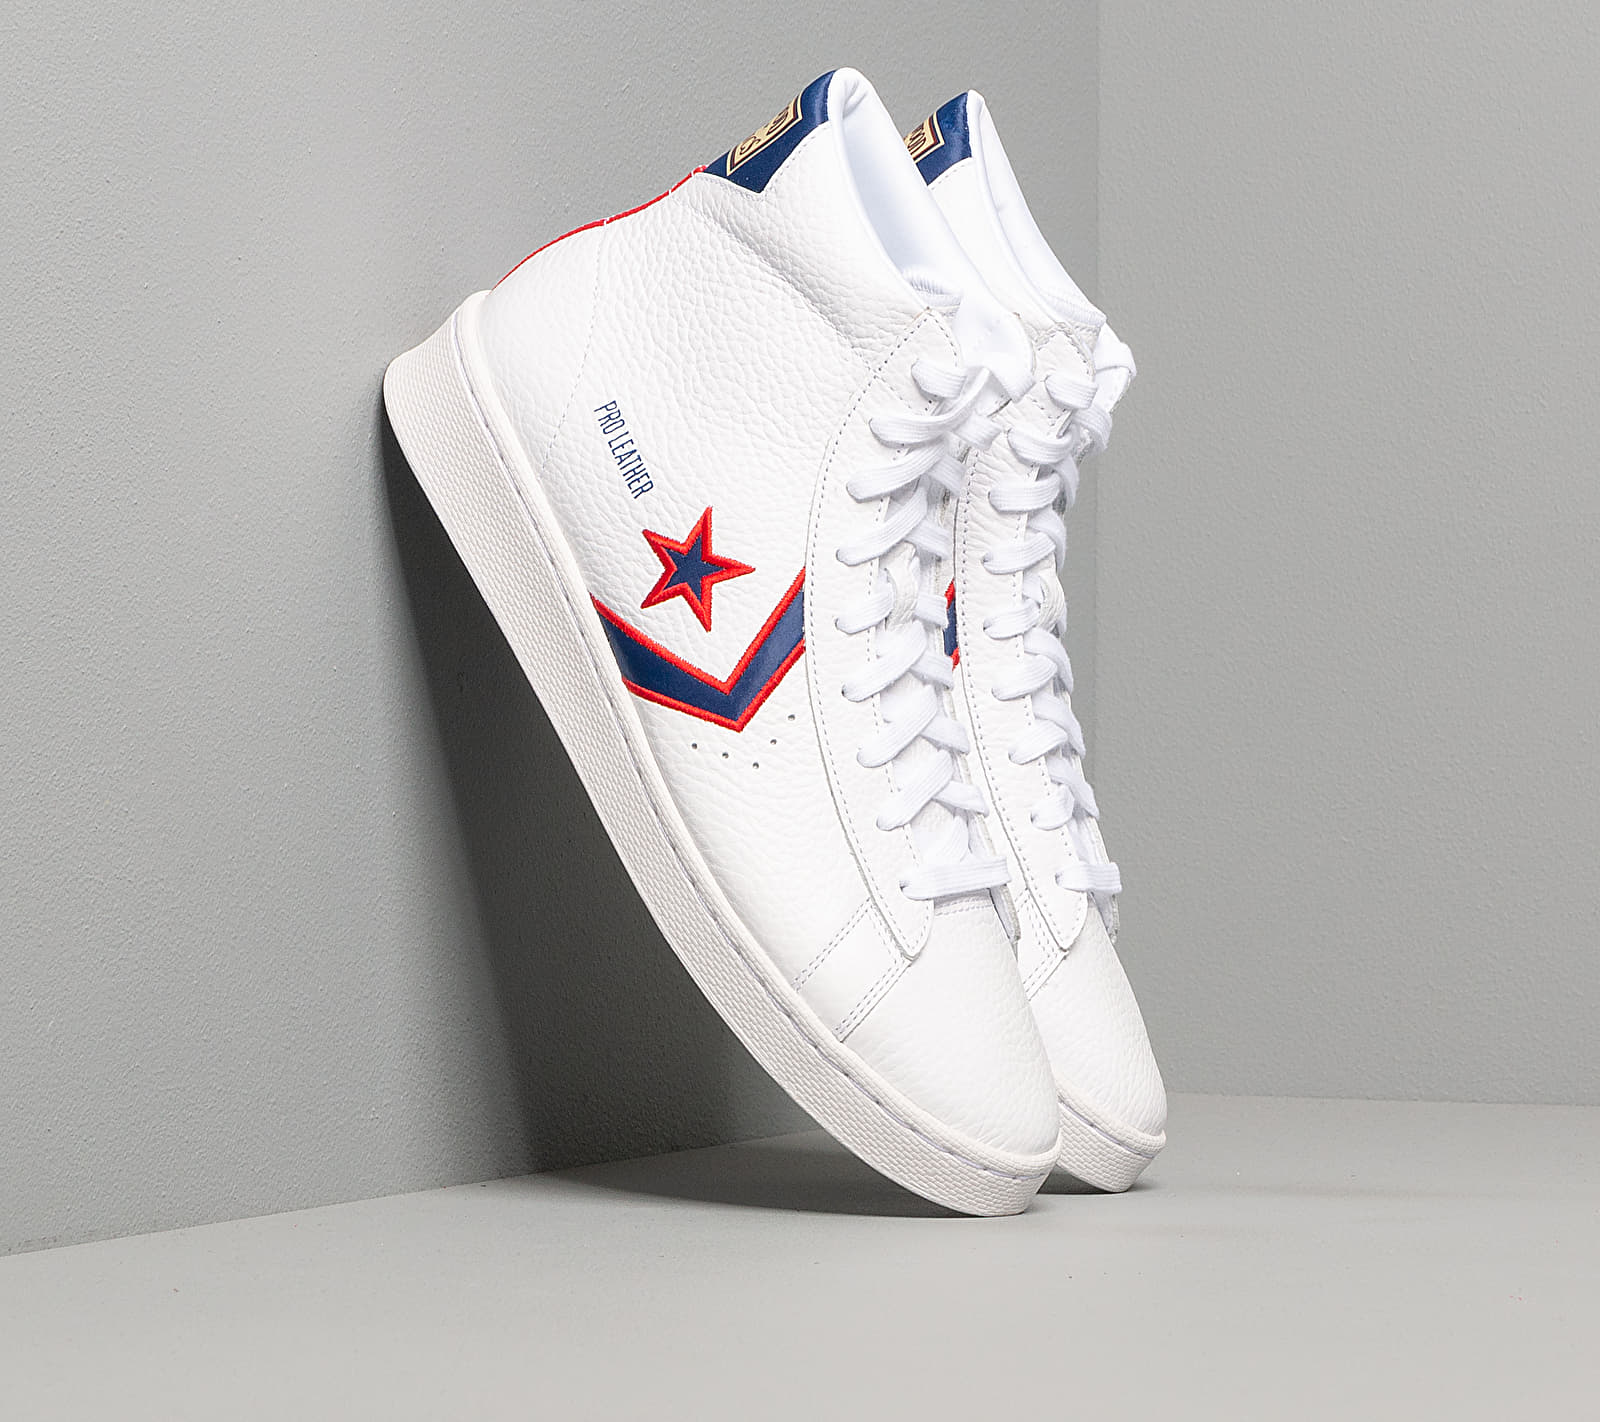 Converse Pro Leather Gold Standard White/Red 167058C